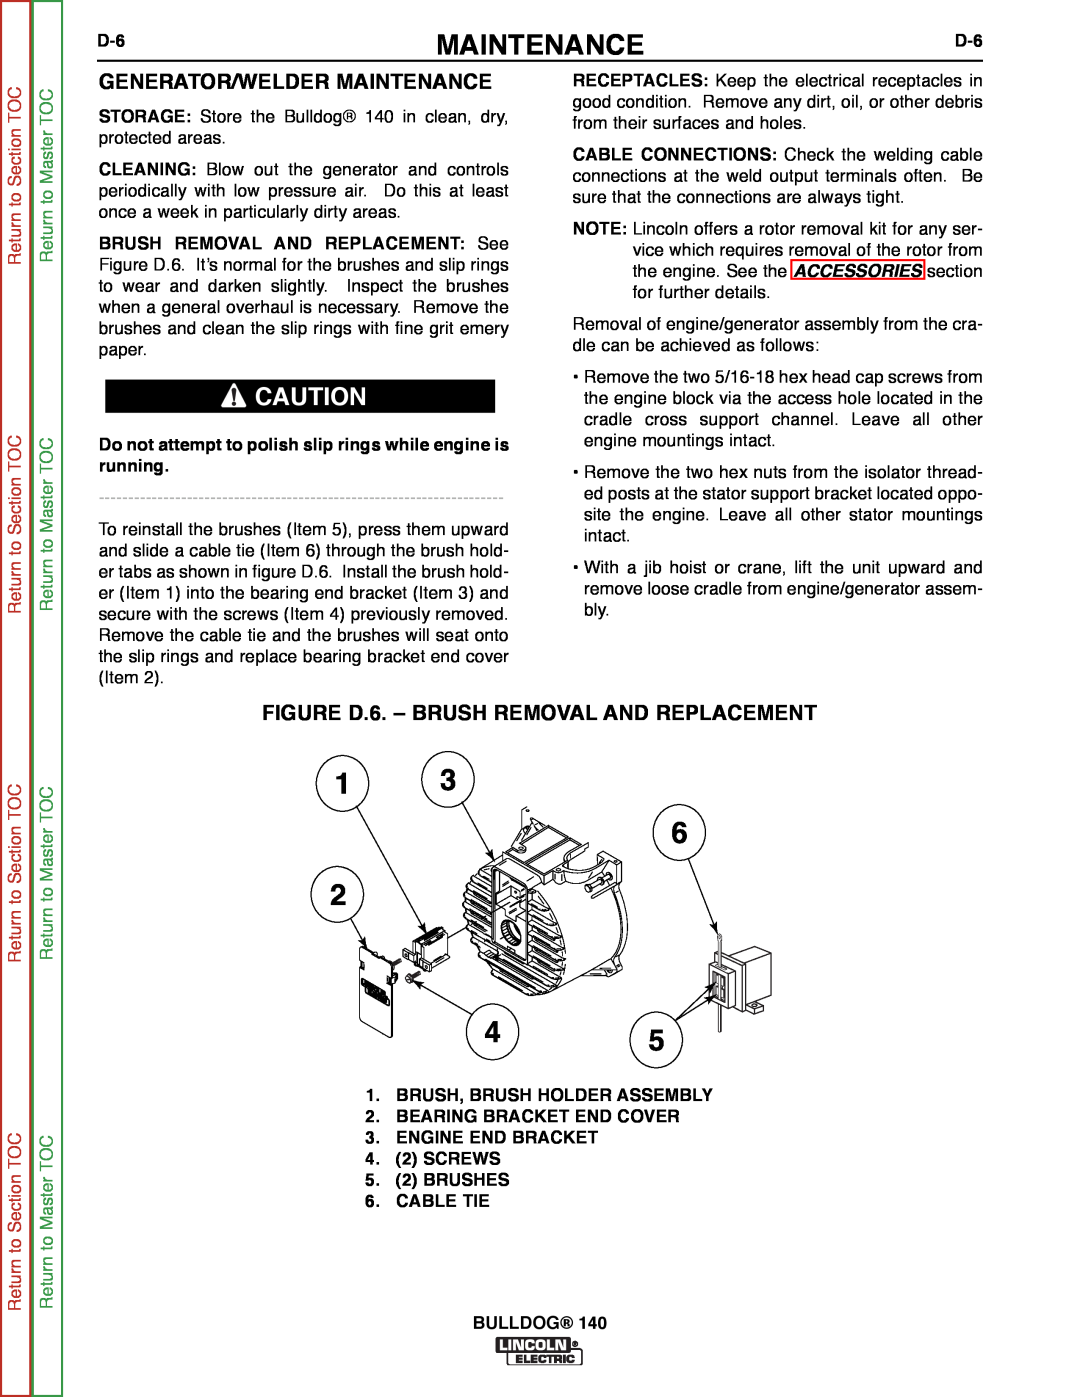 Lincoln Electric SVM208-A Generator/Welder Maintenance, FIGURE D.6. - BRUSH REMOVAL AND REPLACEMENT, Return to Section TOC 